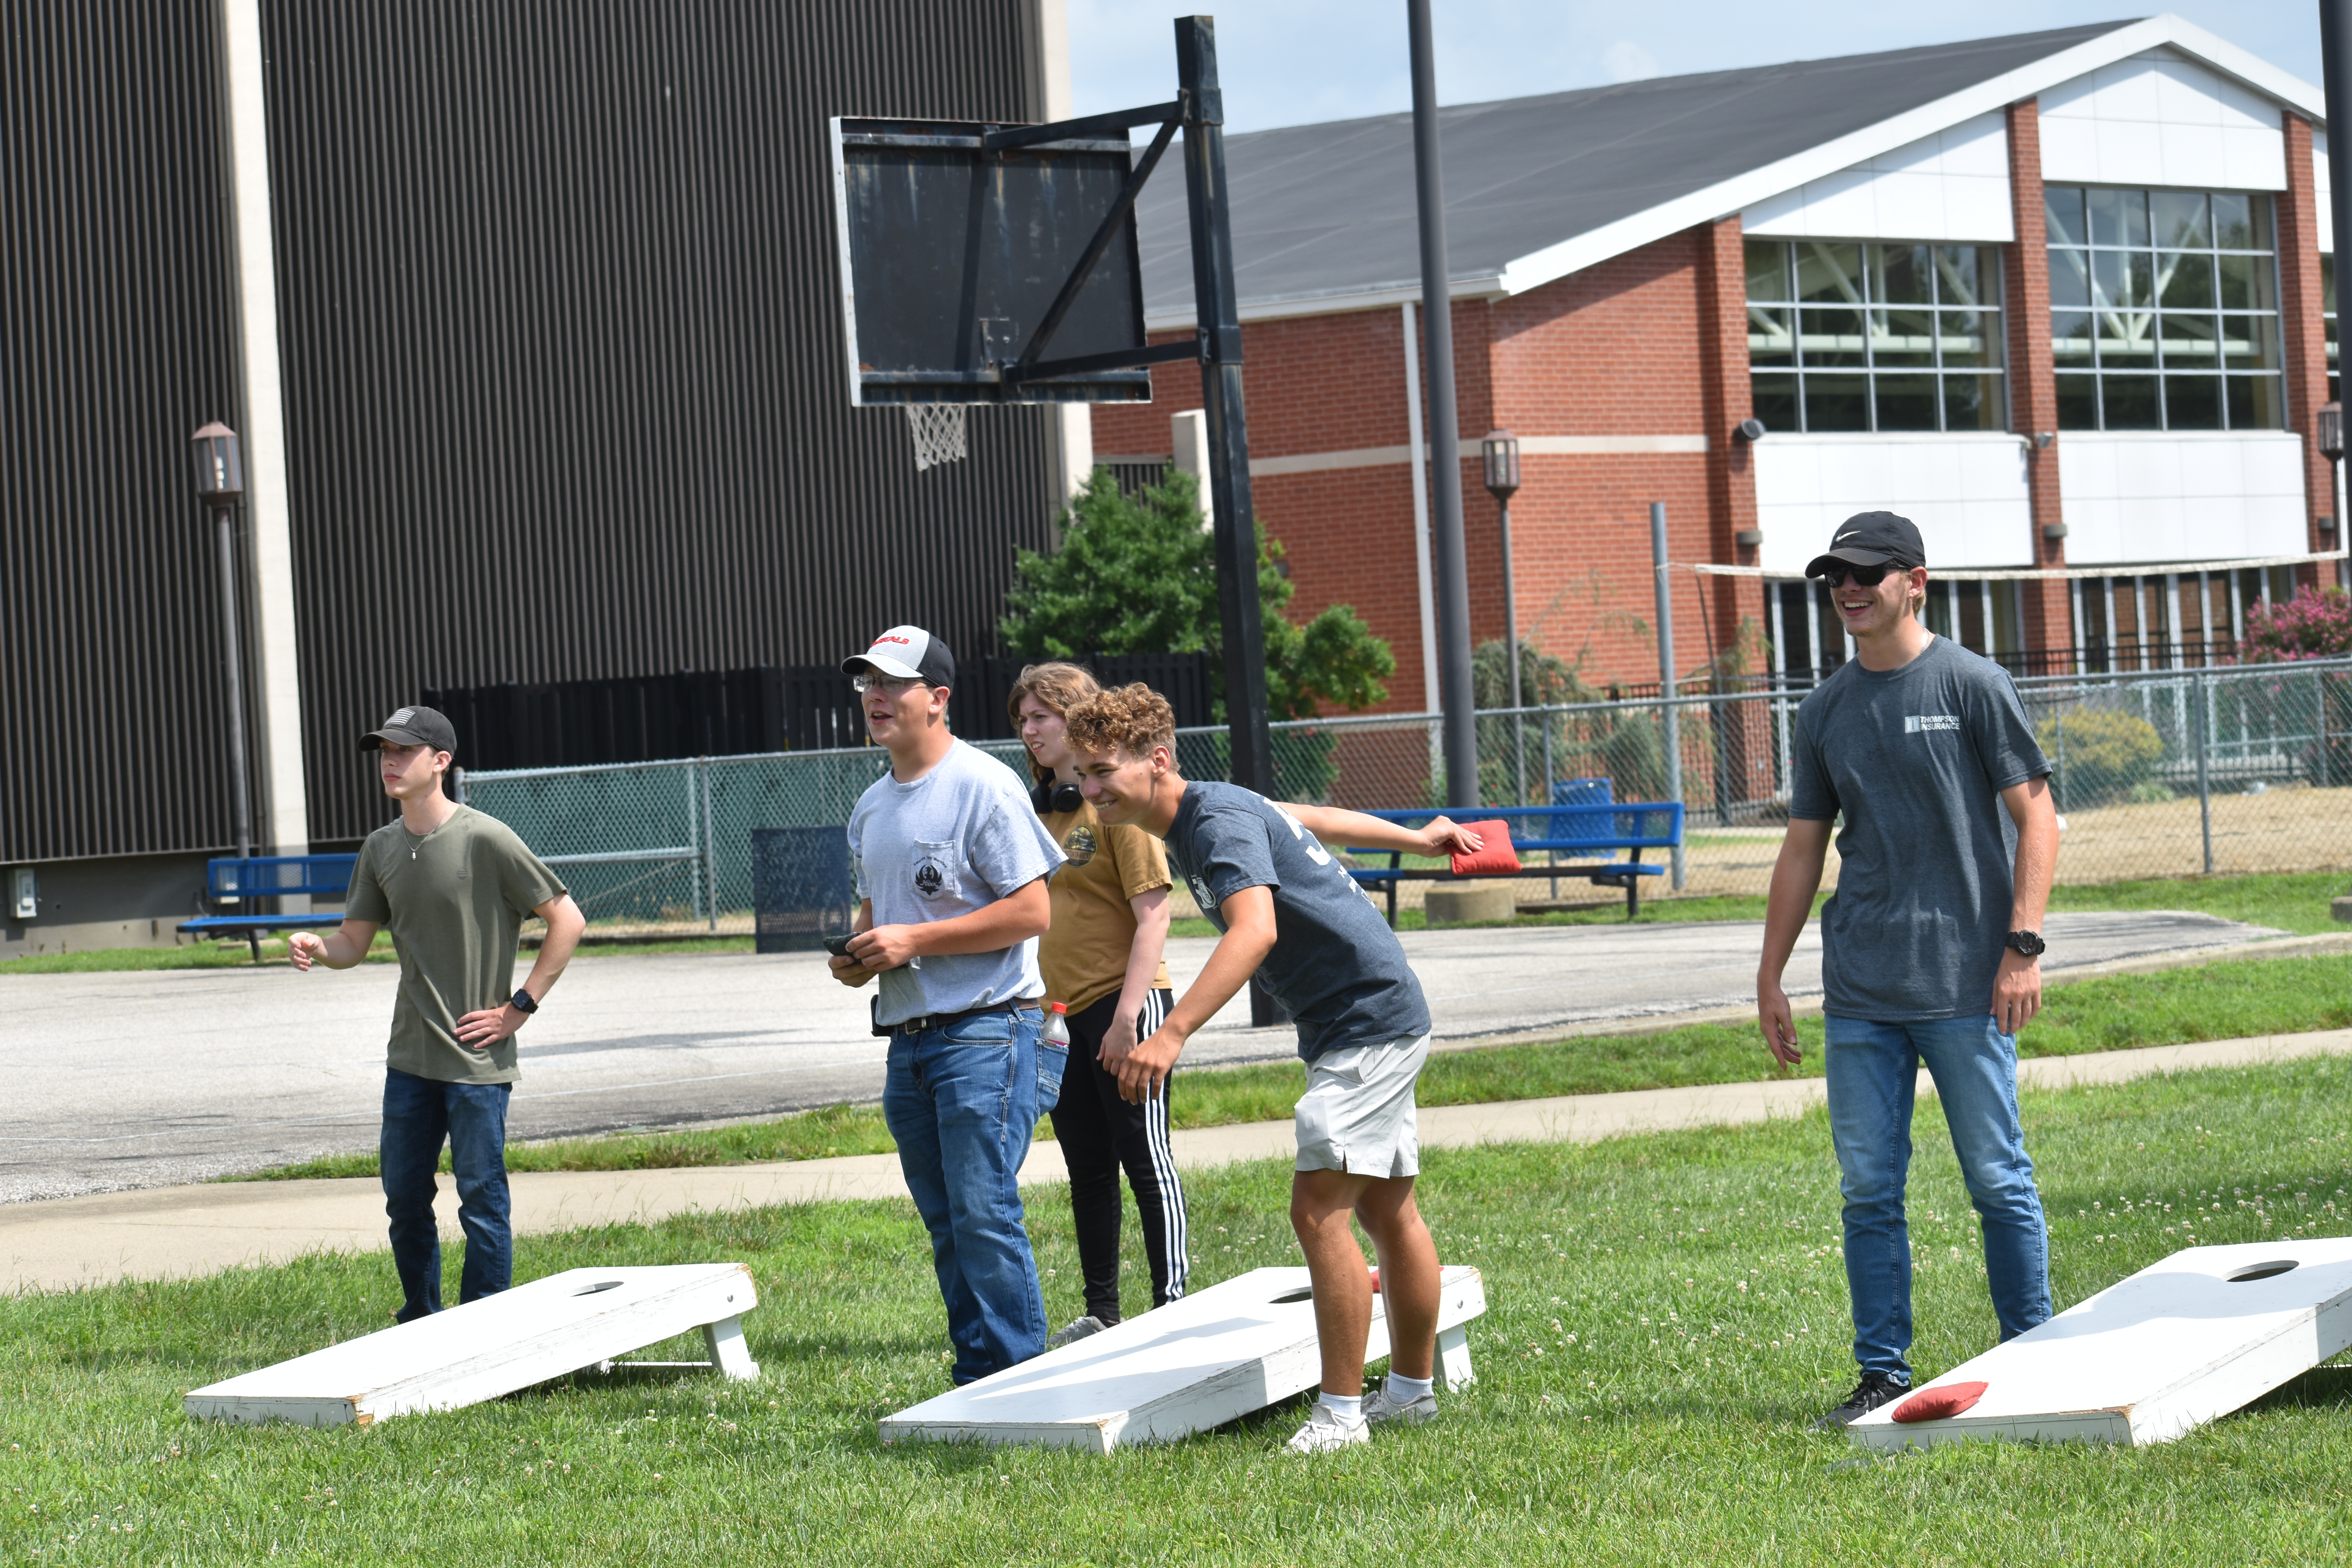 Male students playing cornhole at the VU intramural fields.